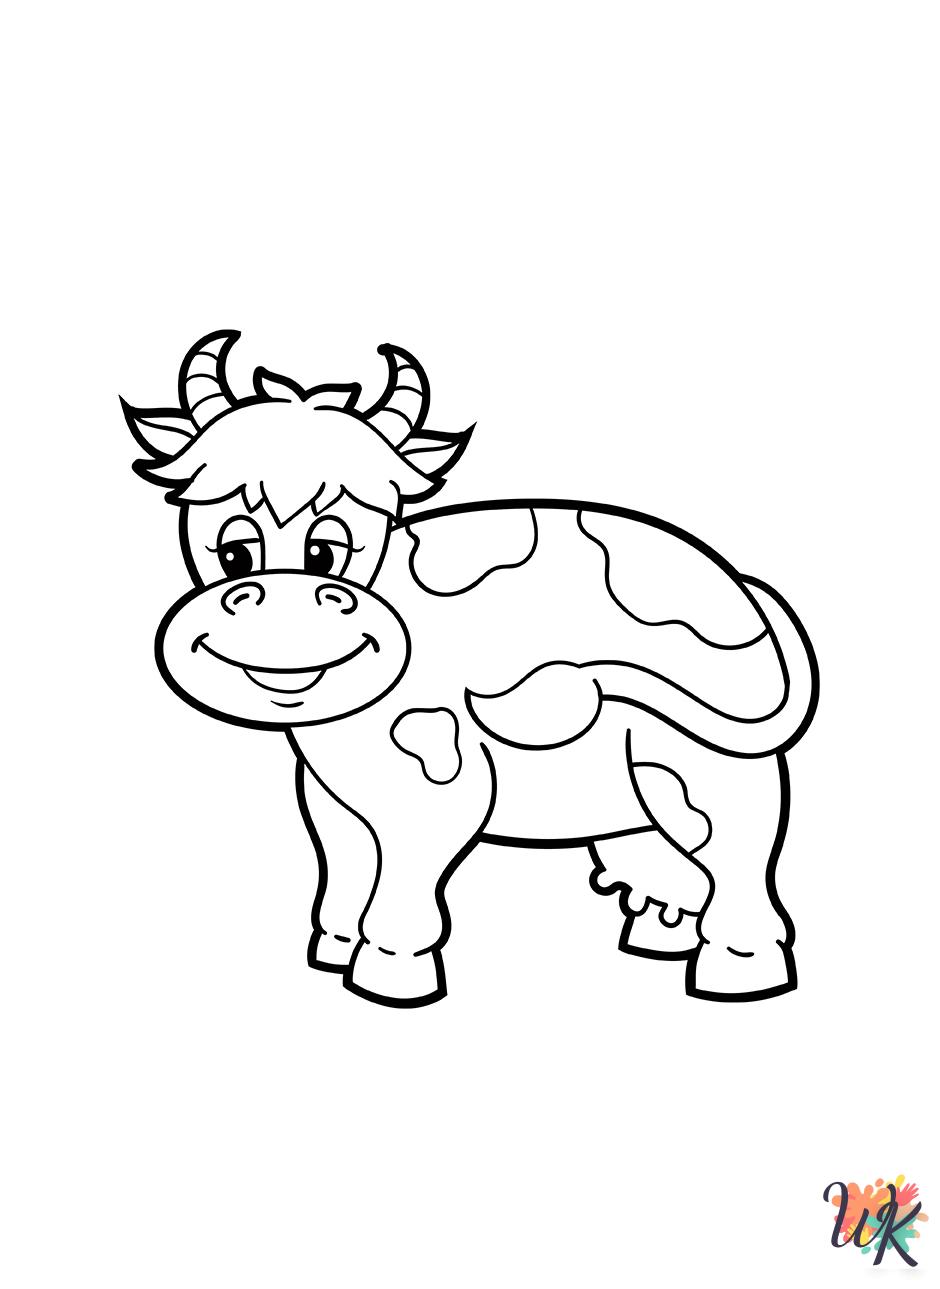 merry Cow coloring pages